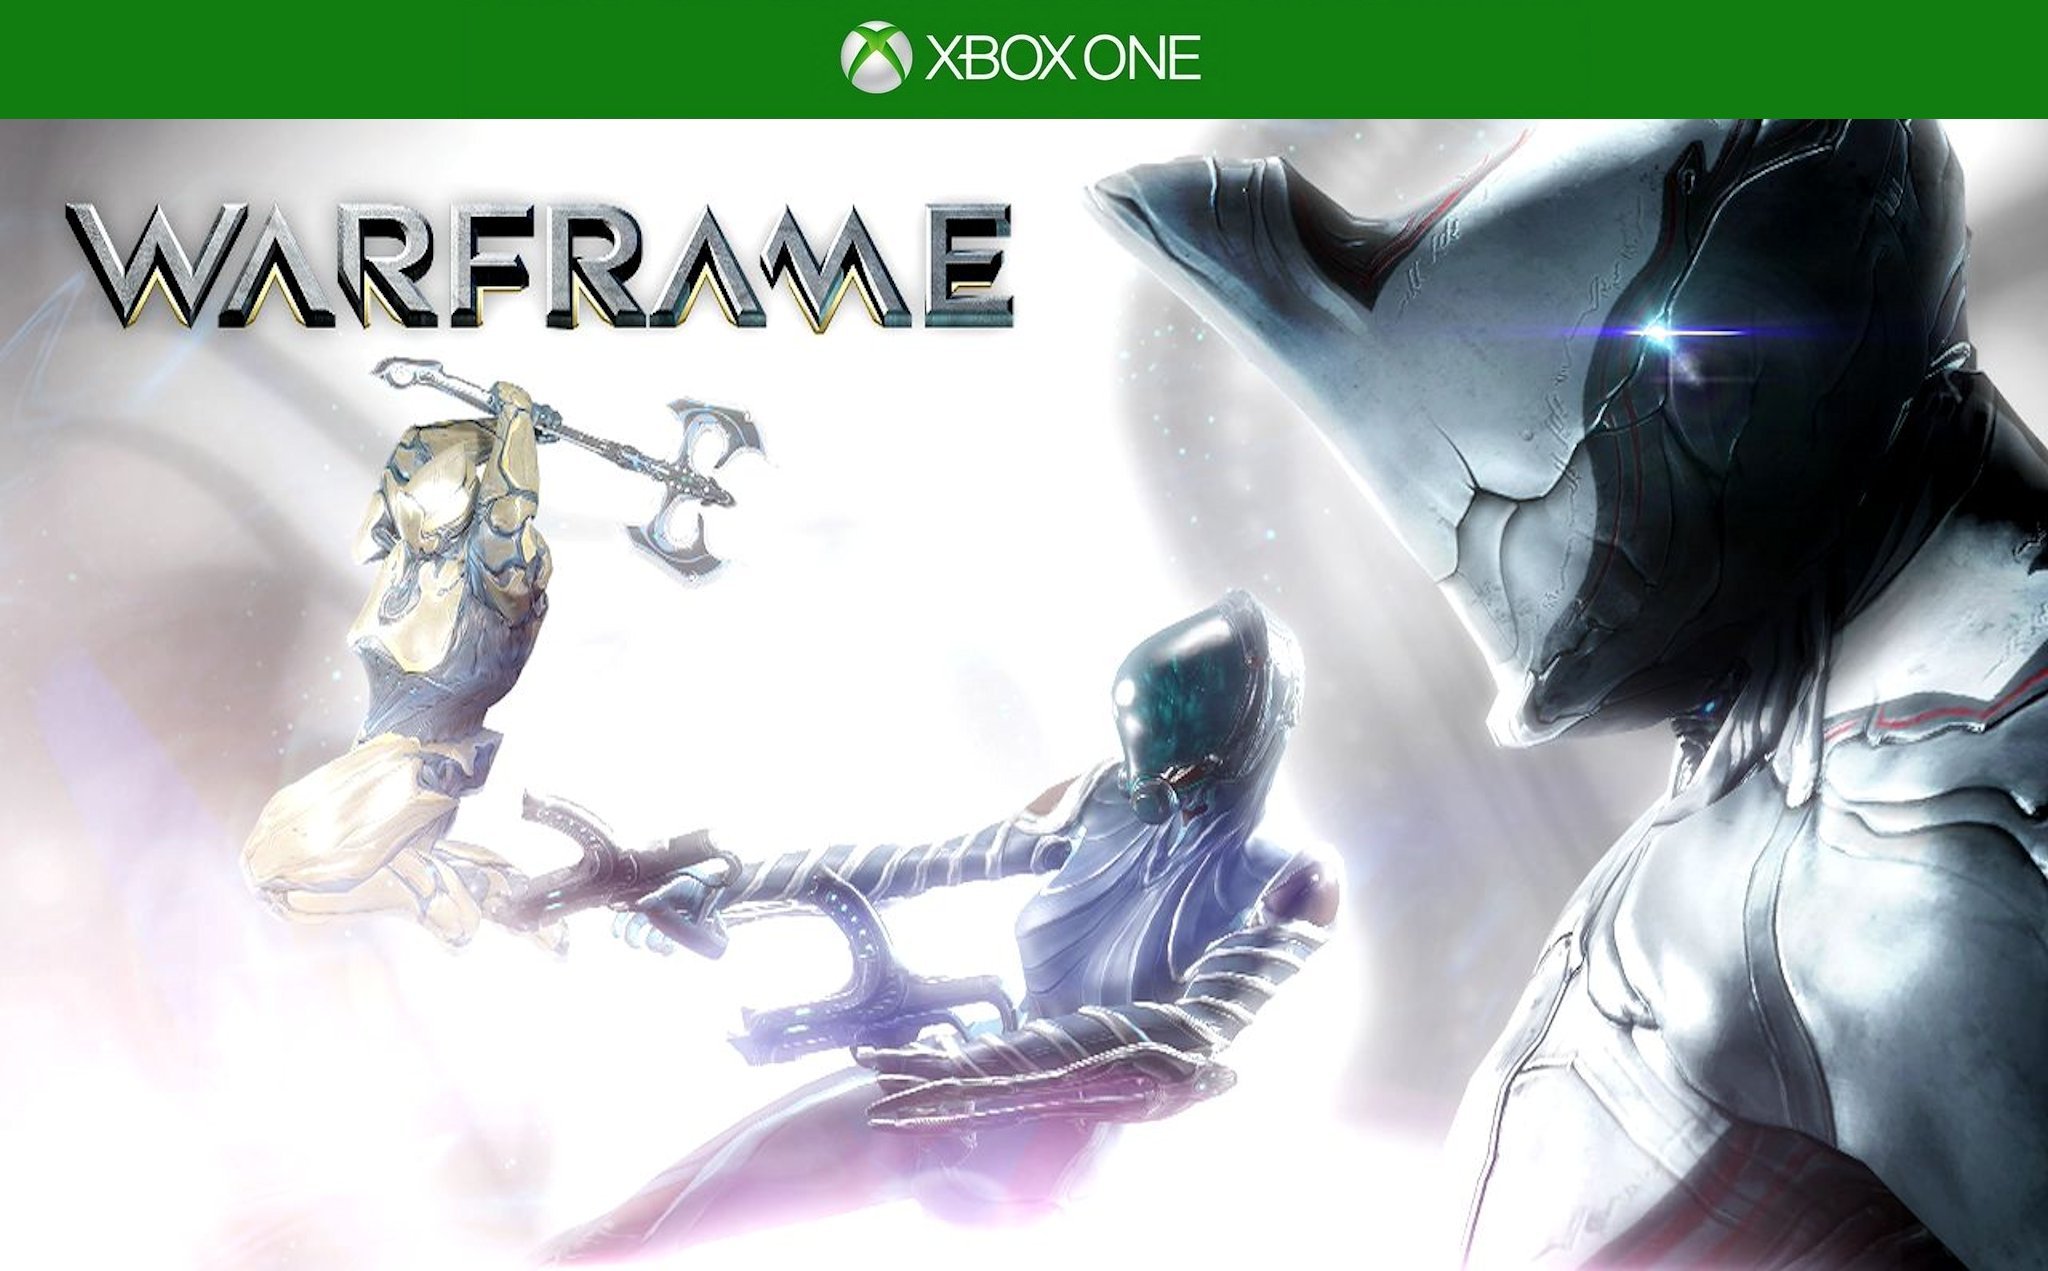 Warframe review – the excellent free alternative to Destiny on Xbox One